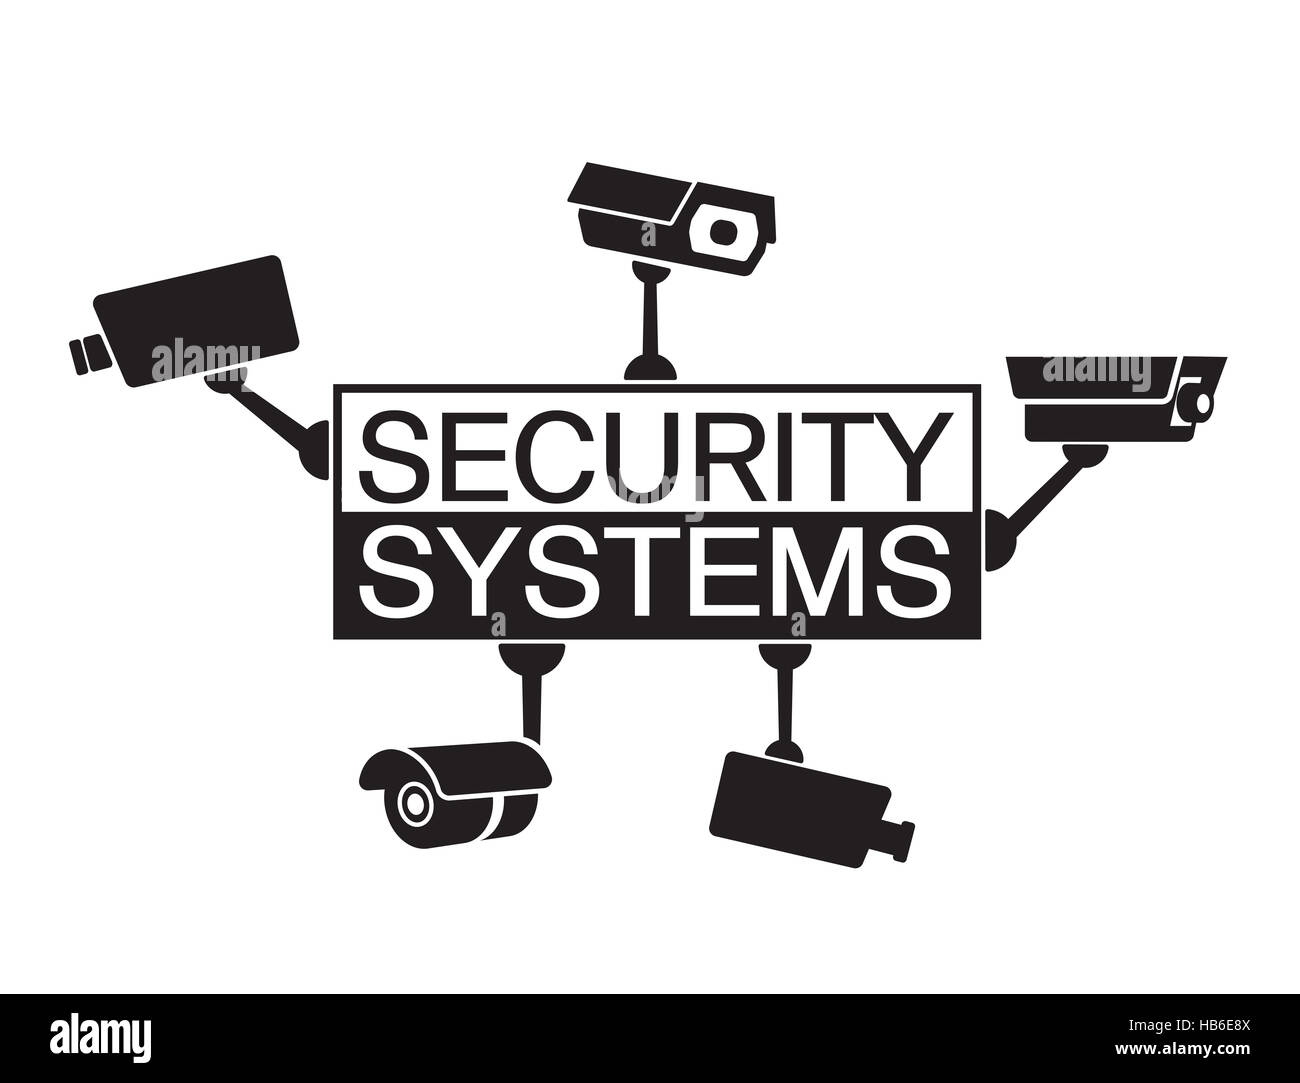 Logo design element Security systems Stock Photo